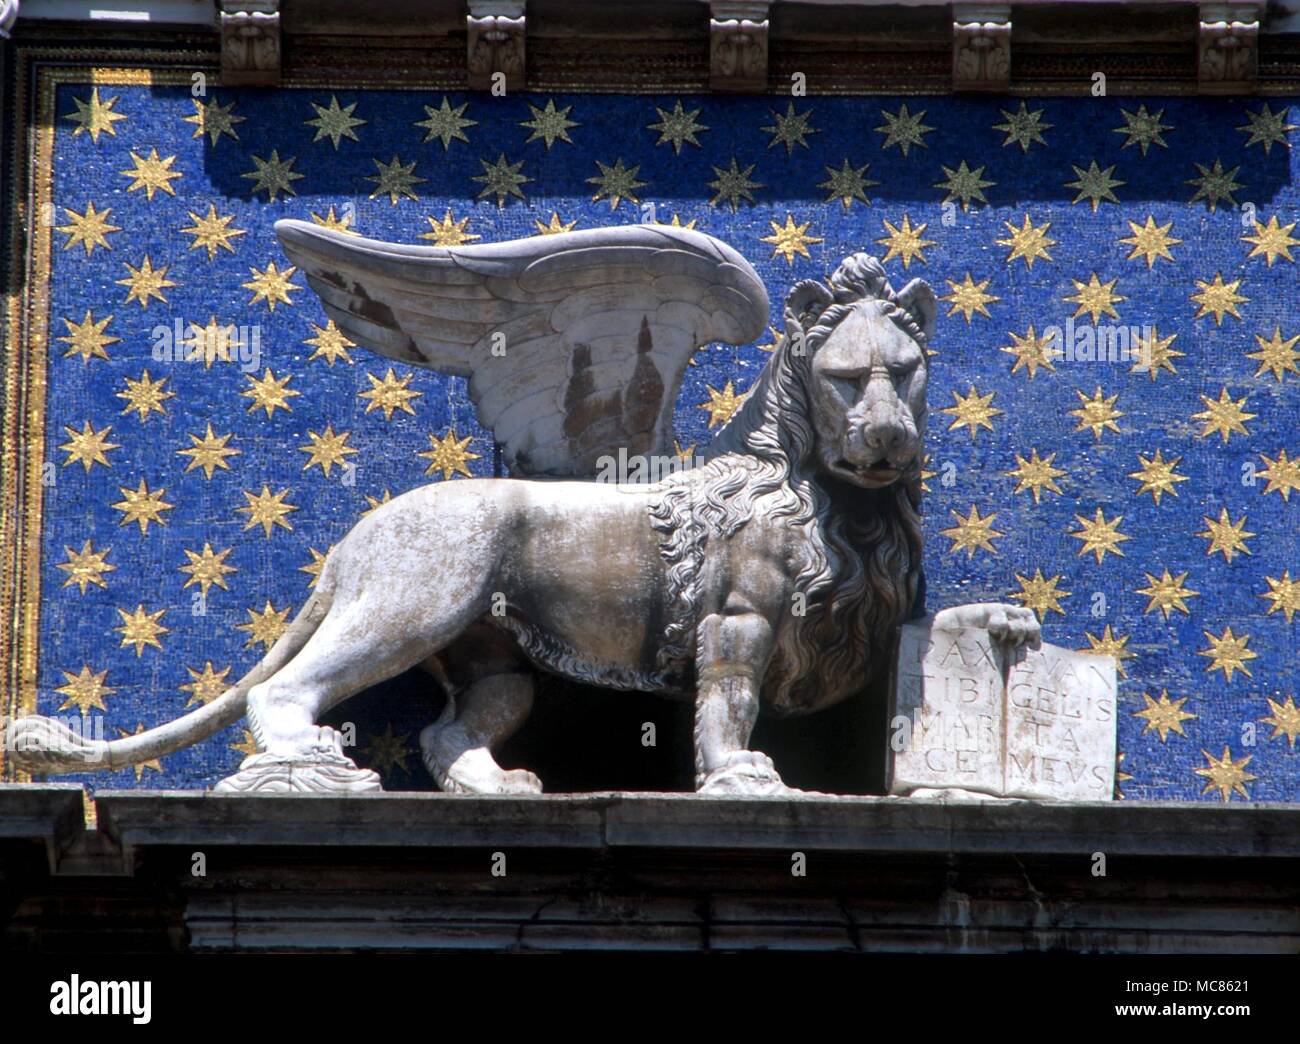 CHRISTIAN The Lion of St Marks on the horlogium tower overlooking St Mark's Square, Venice Stock Photo